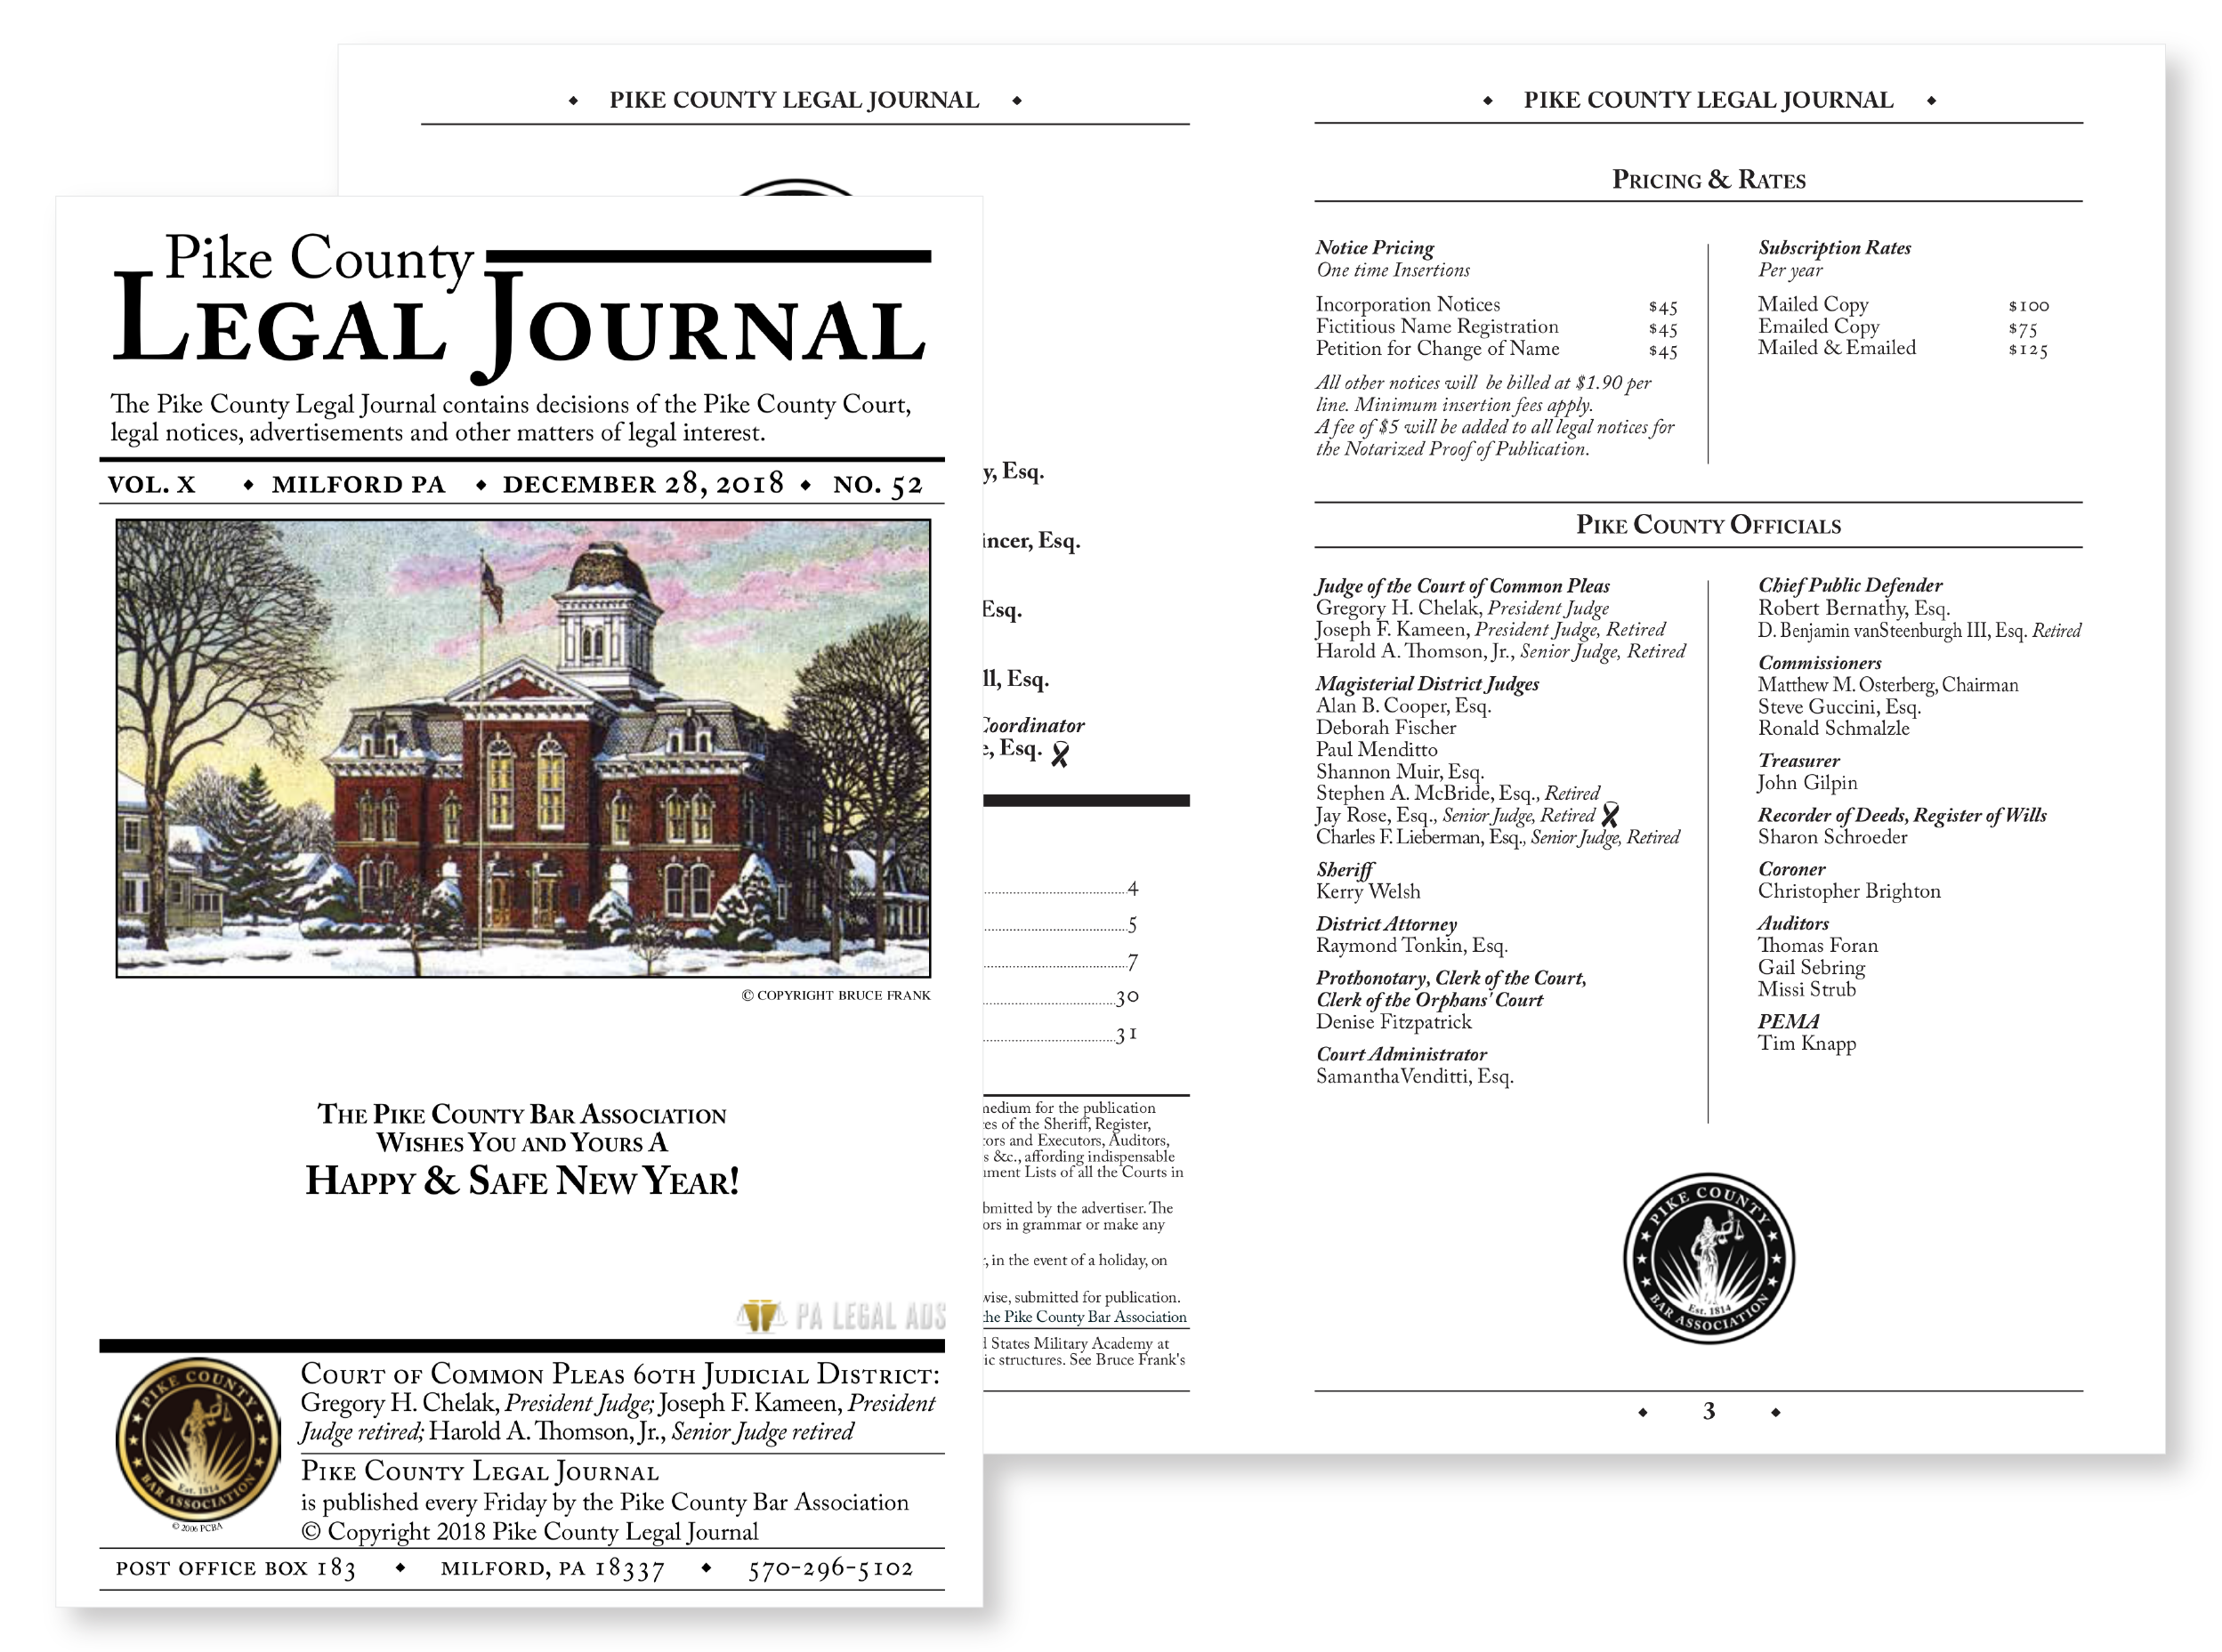 Legal Journal Layout